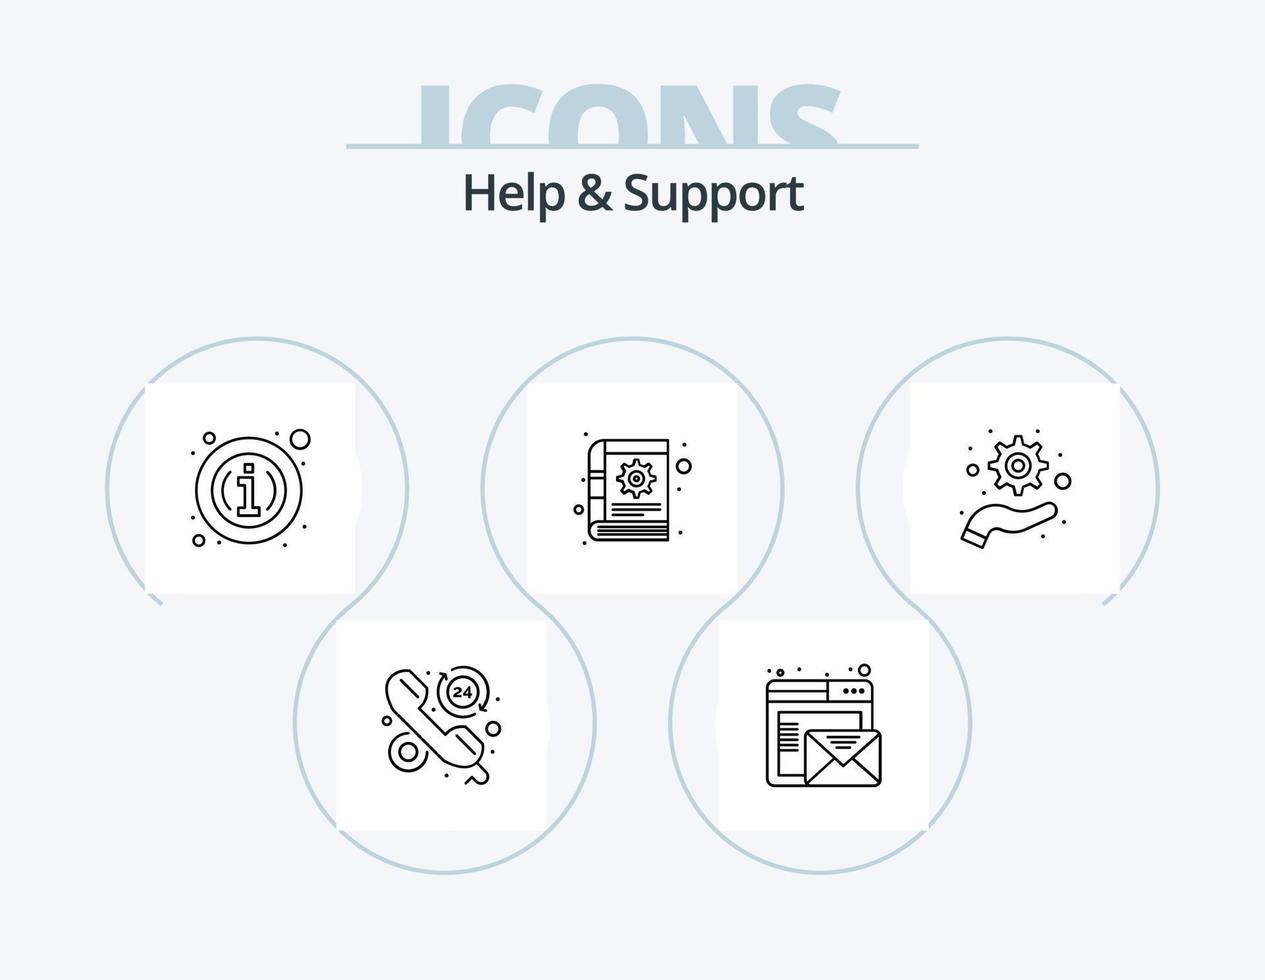 Help And Support Line Icon Pack 5 Icon Design. faq. support. online. optimization. support vector